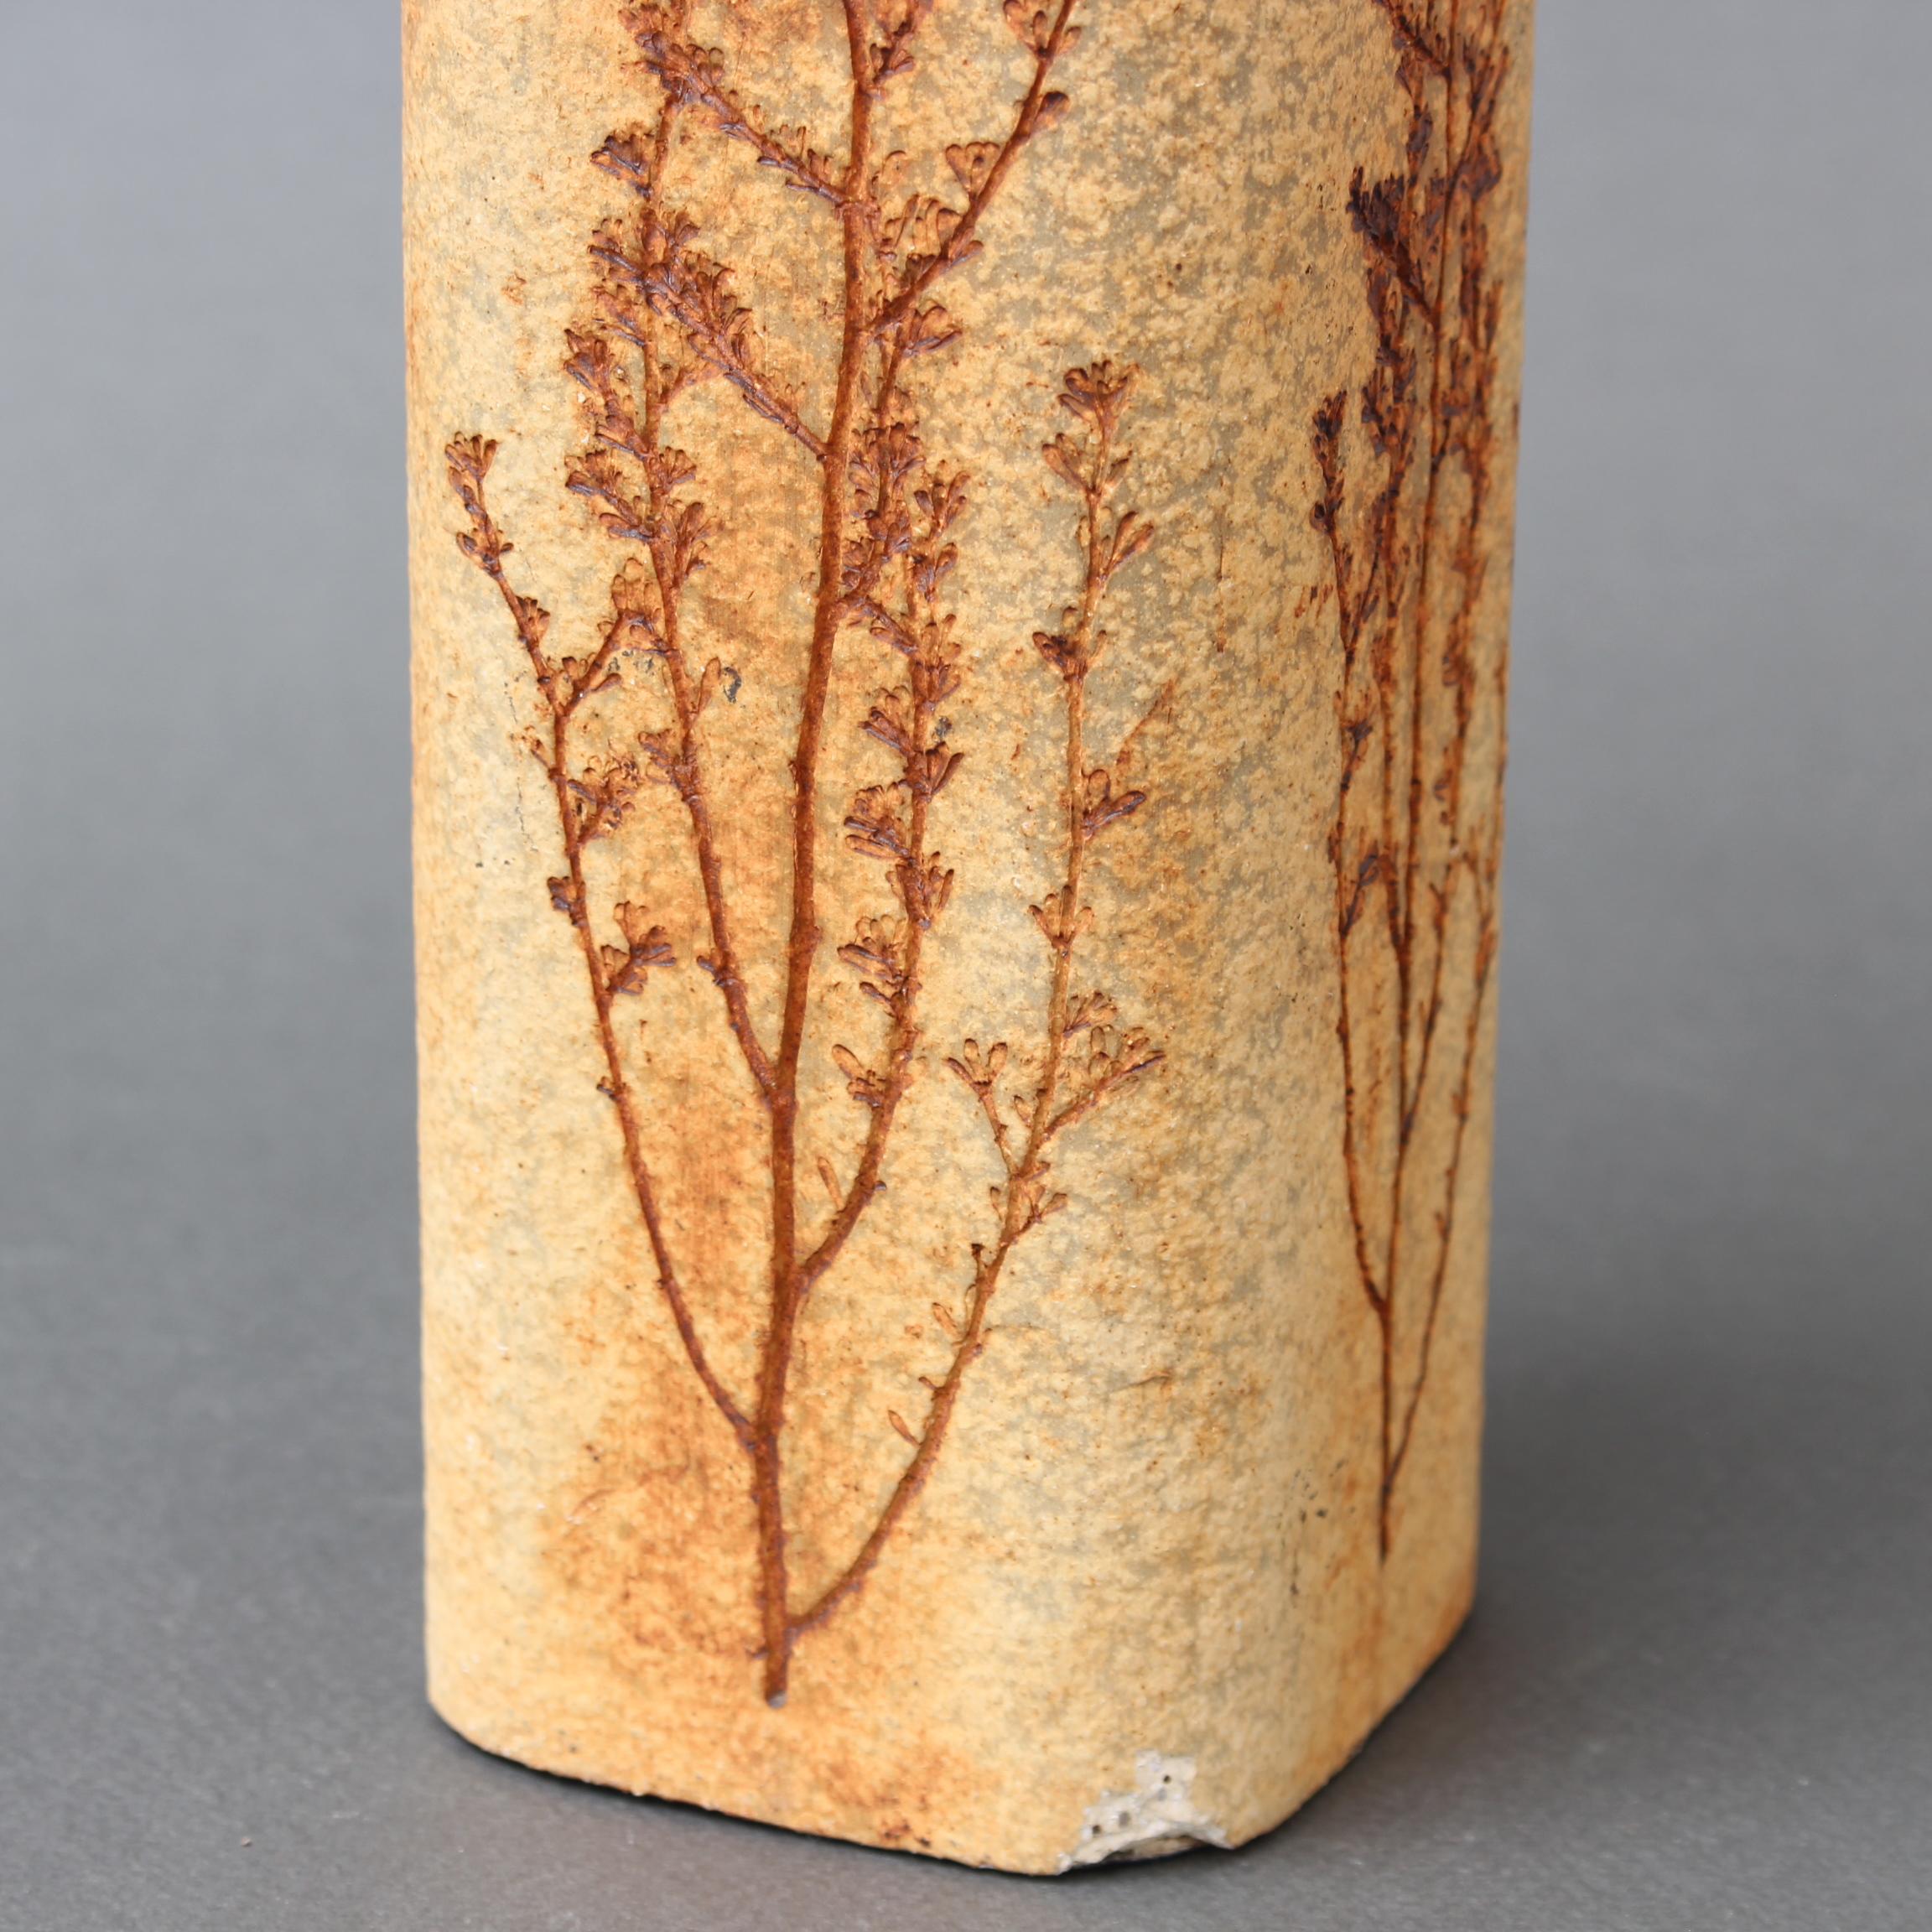 Vintage French Ceramic Vase with Plant Motif by Raymonde Leduc (circa 1960s) For Sale 8